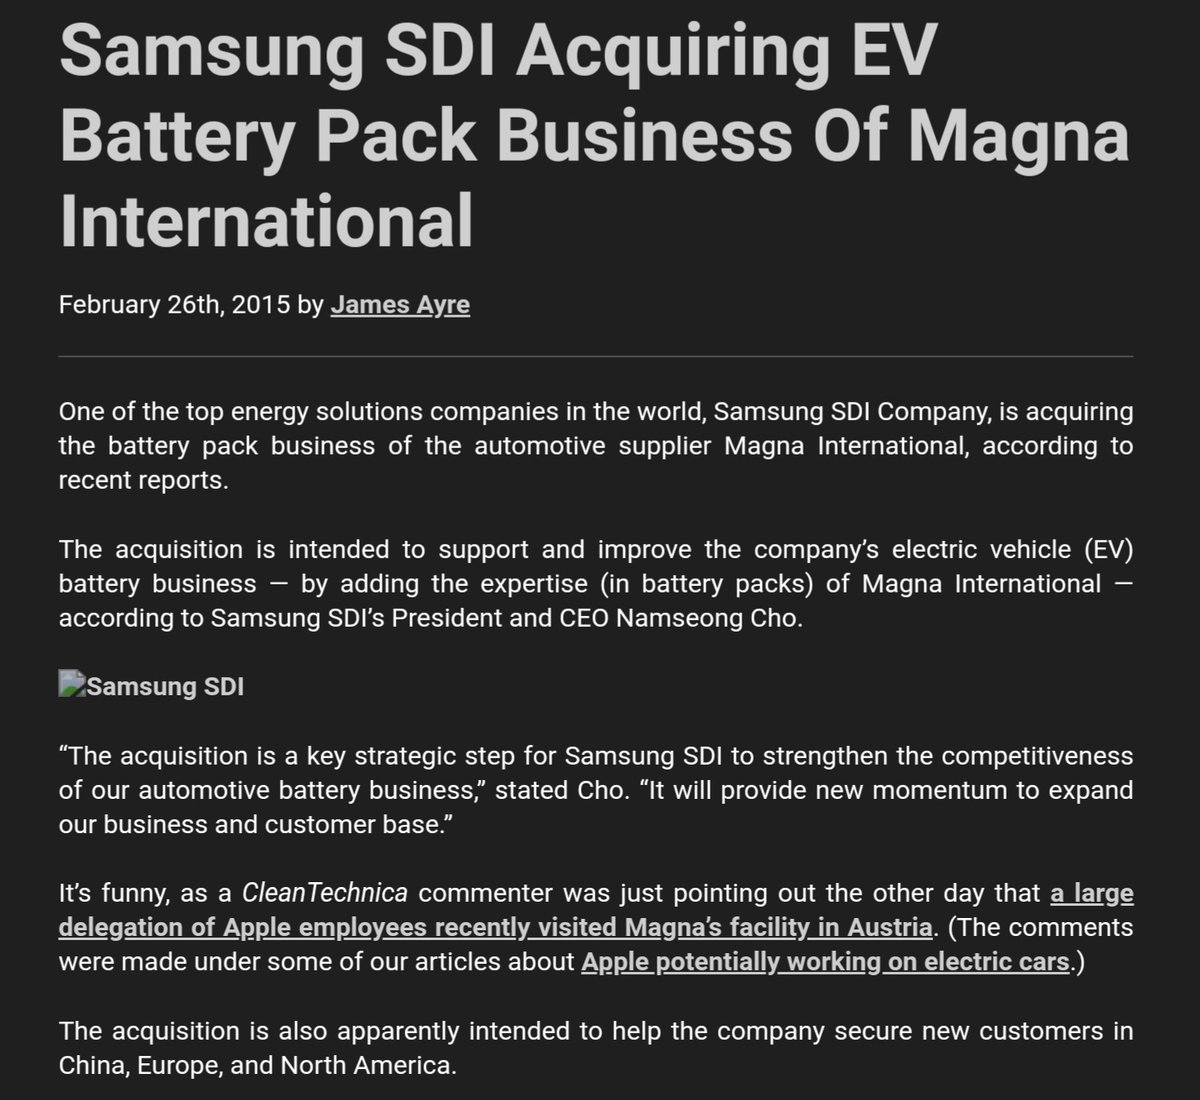 Samsung has a fairly deep relationship with Magna already, regarding EV batteries as well as consulting